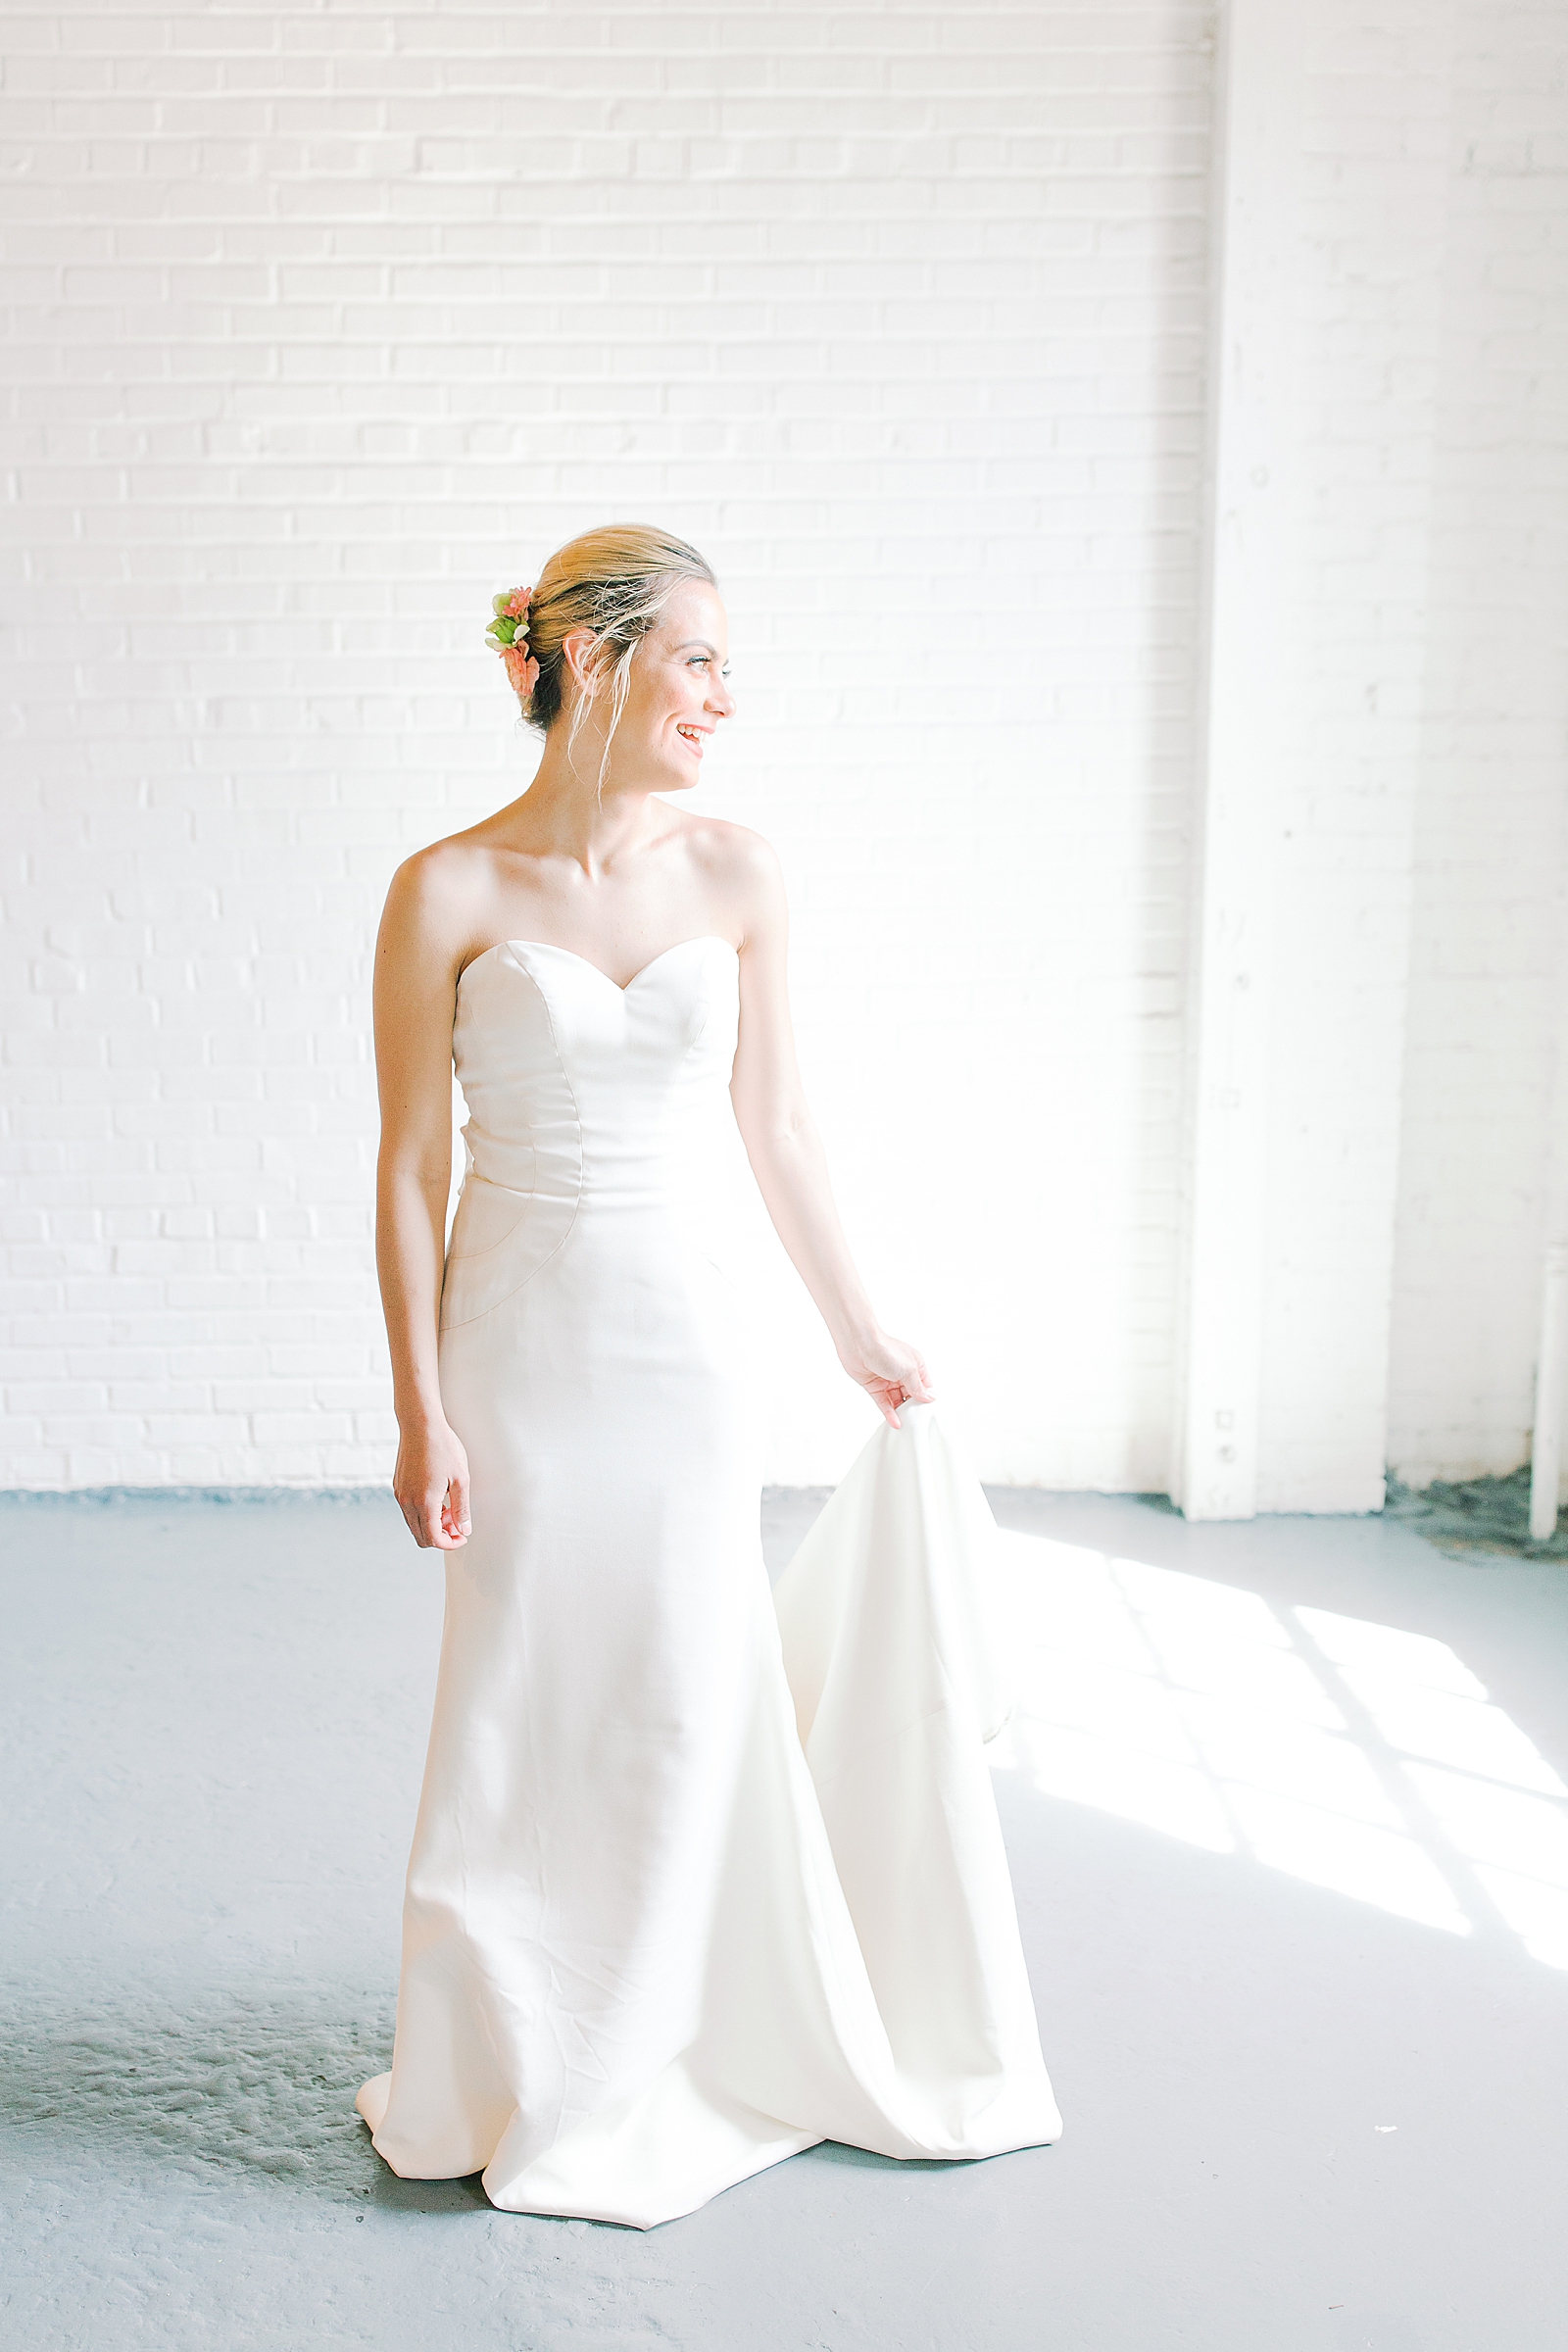 Spring Brickyard Wedding Bride Looking out window and Laughing Photo